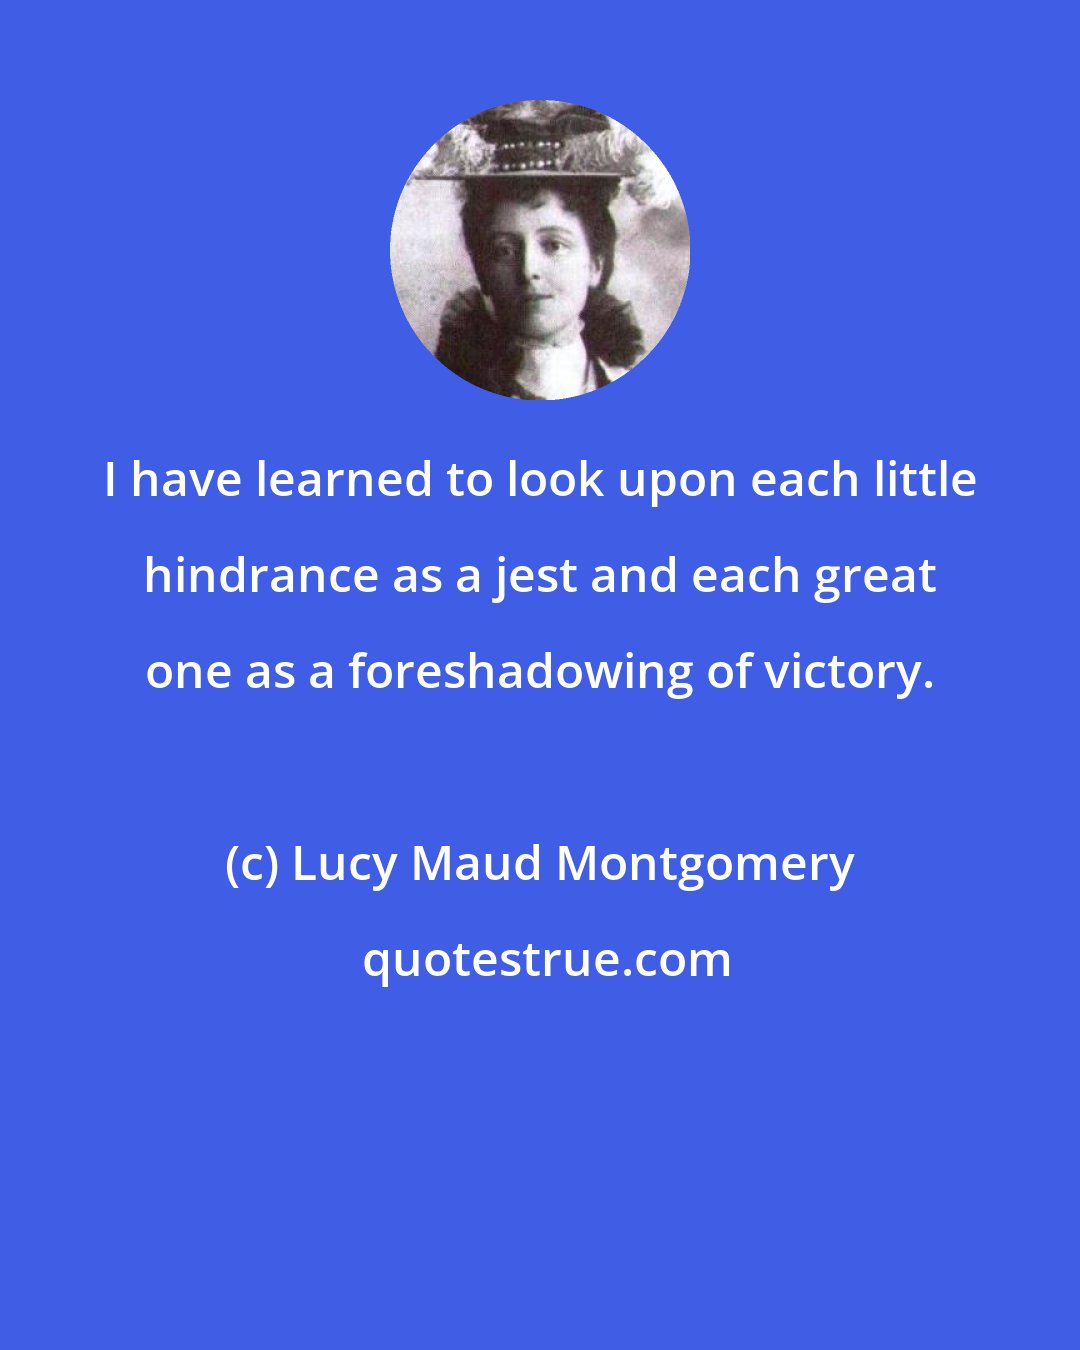 Lucy Maud Montgomery: I have learned to look upon each little hindrance as a jest and each great one as a foreshadowing of victory.